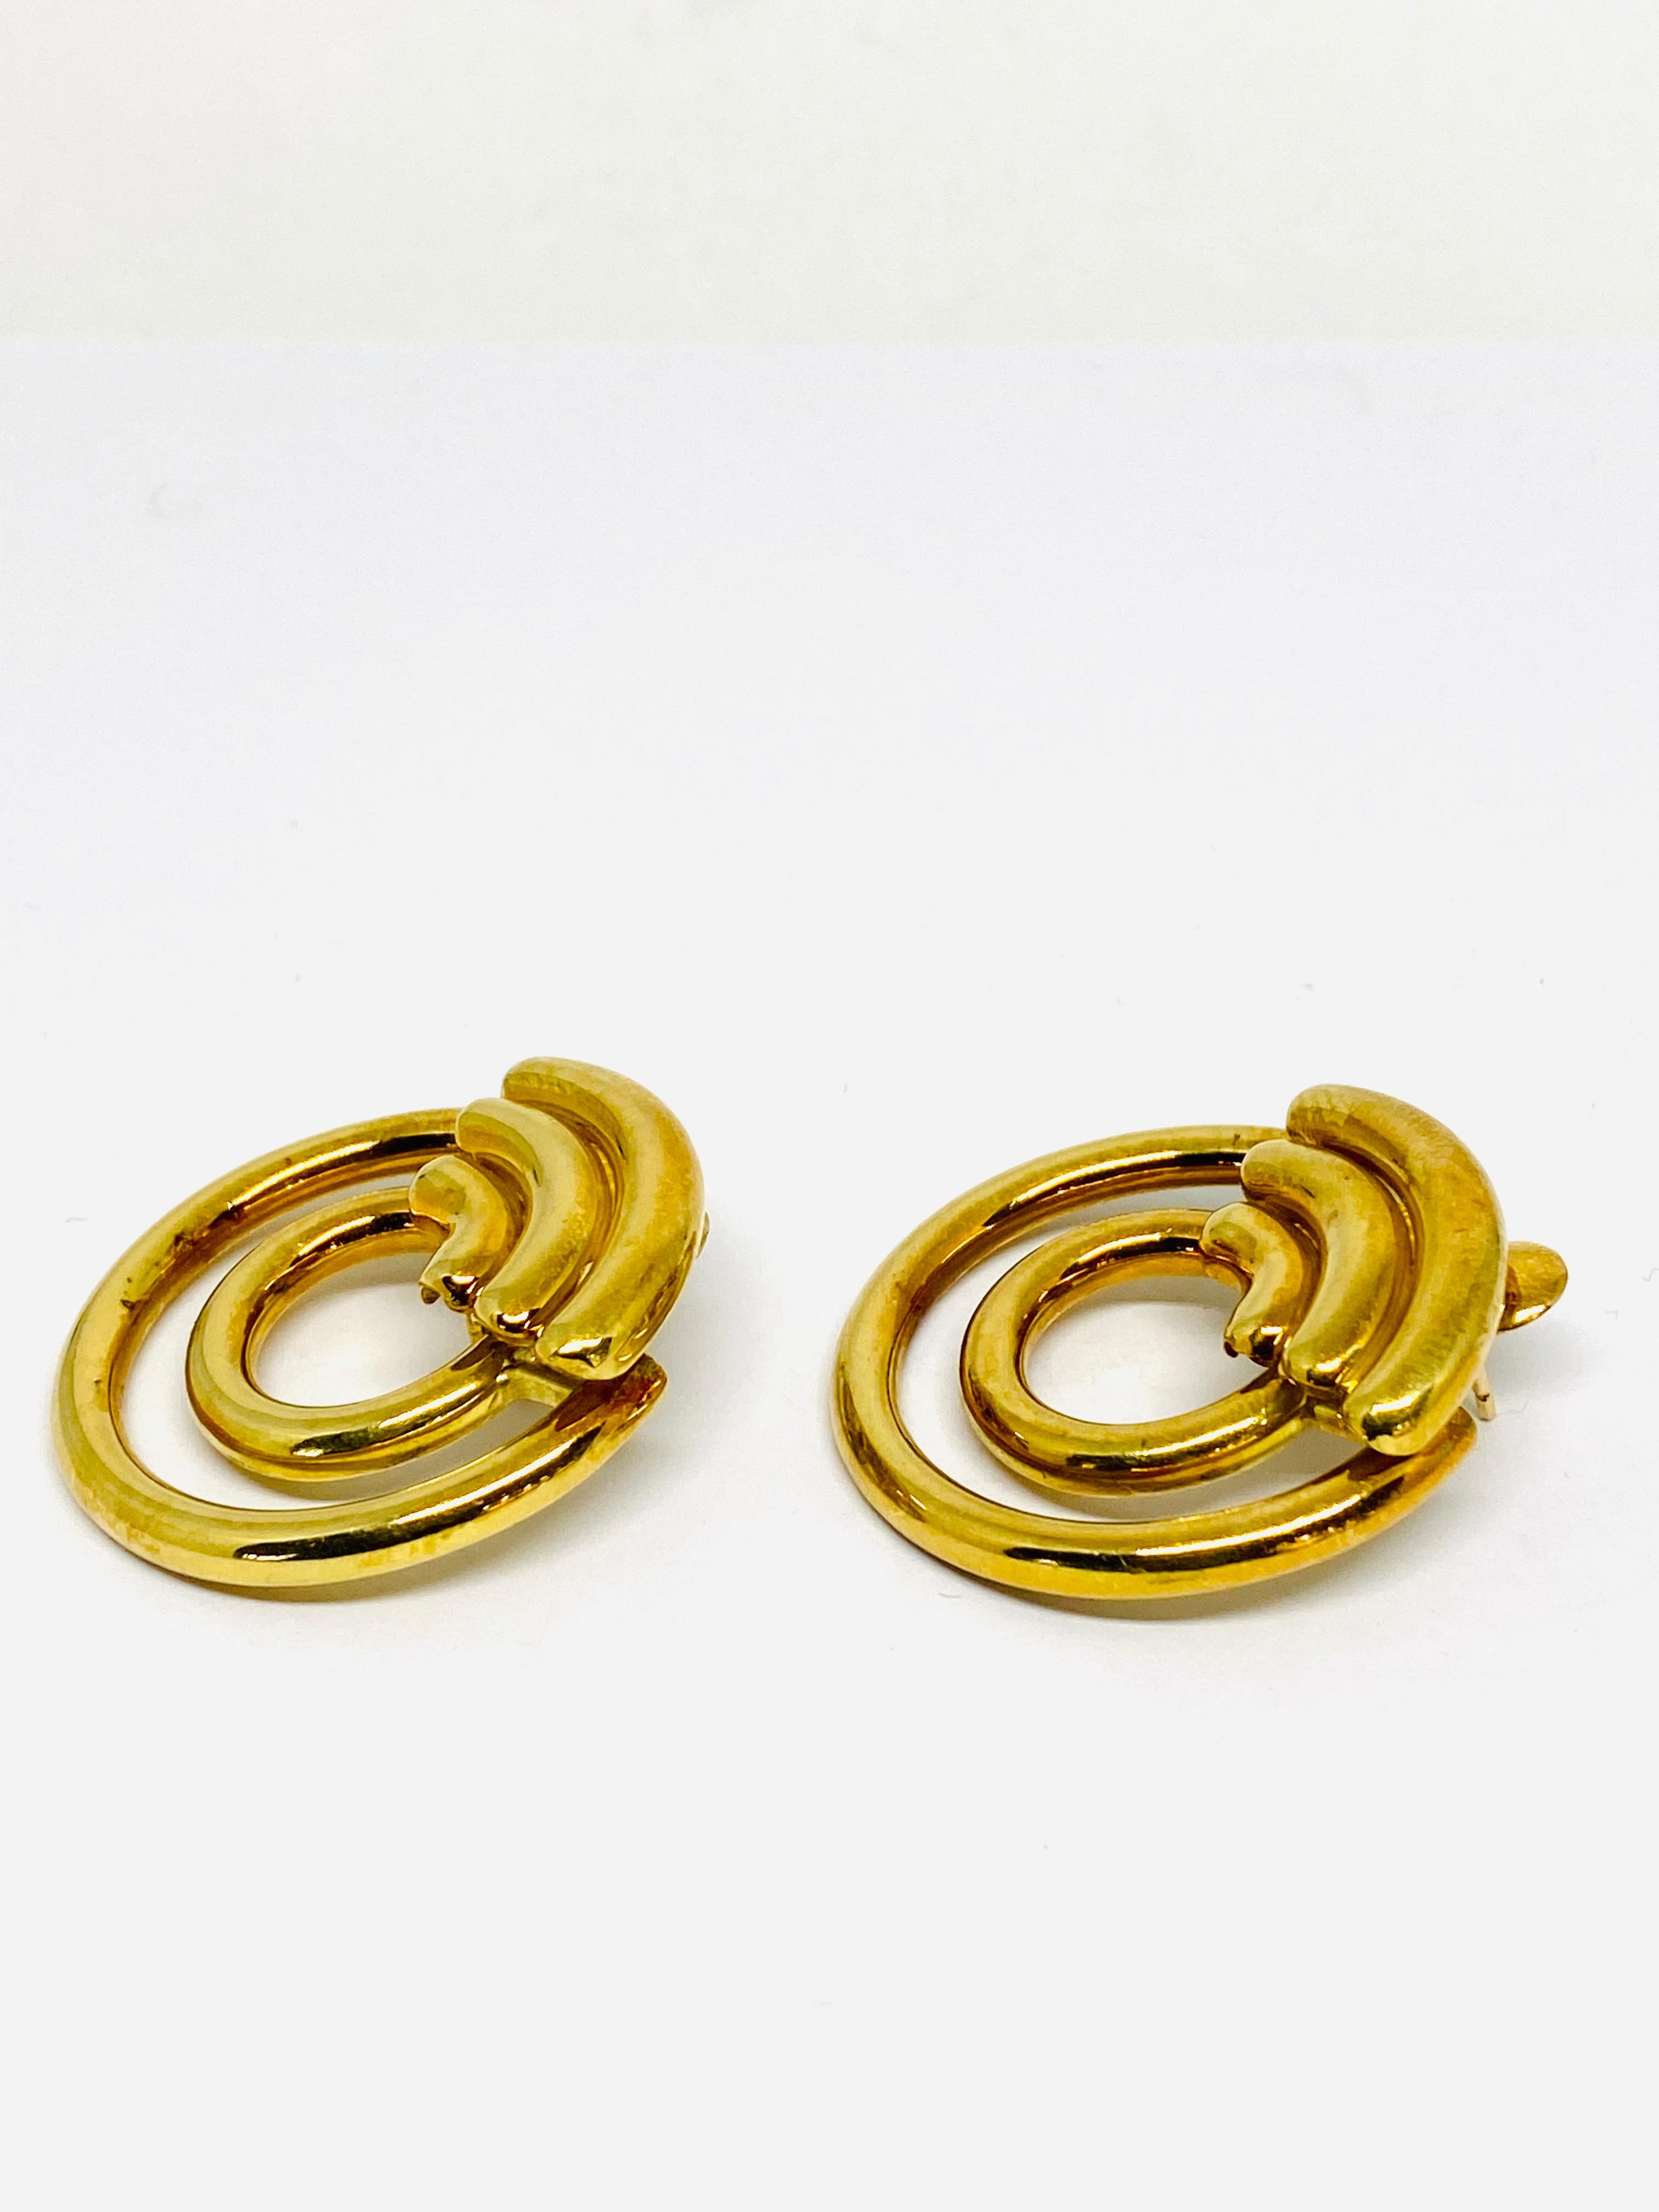 1970's Vintage CARTIER Aldo Cipullo 18K Yellow Gold Hoop Earrings

Product details:
Circa 1970
18K yellow gold double circle hoop style clip- on earrings w/ post
Signed Cartier Cipullo 18K and numbered 
Total weight is 38.0 grams 
Made in New York 
